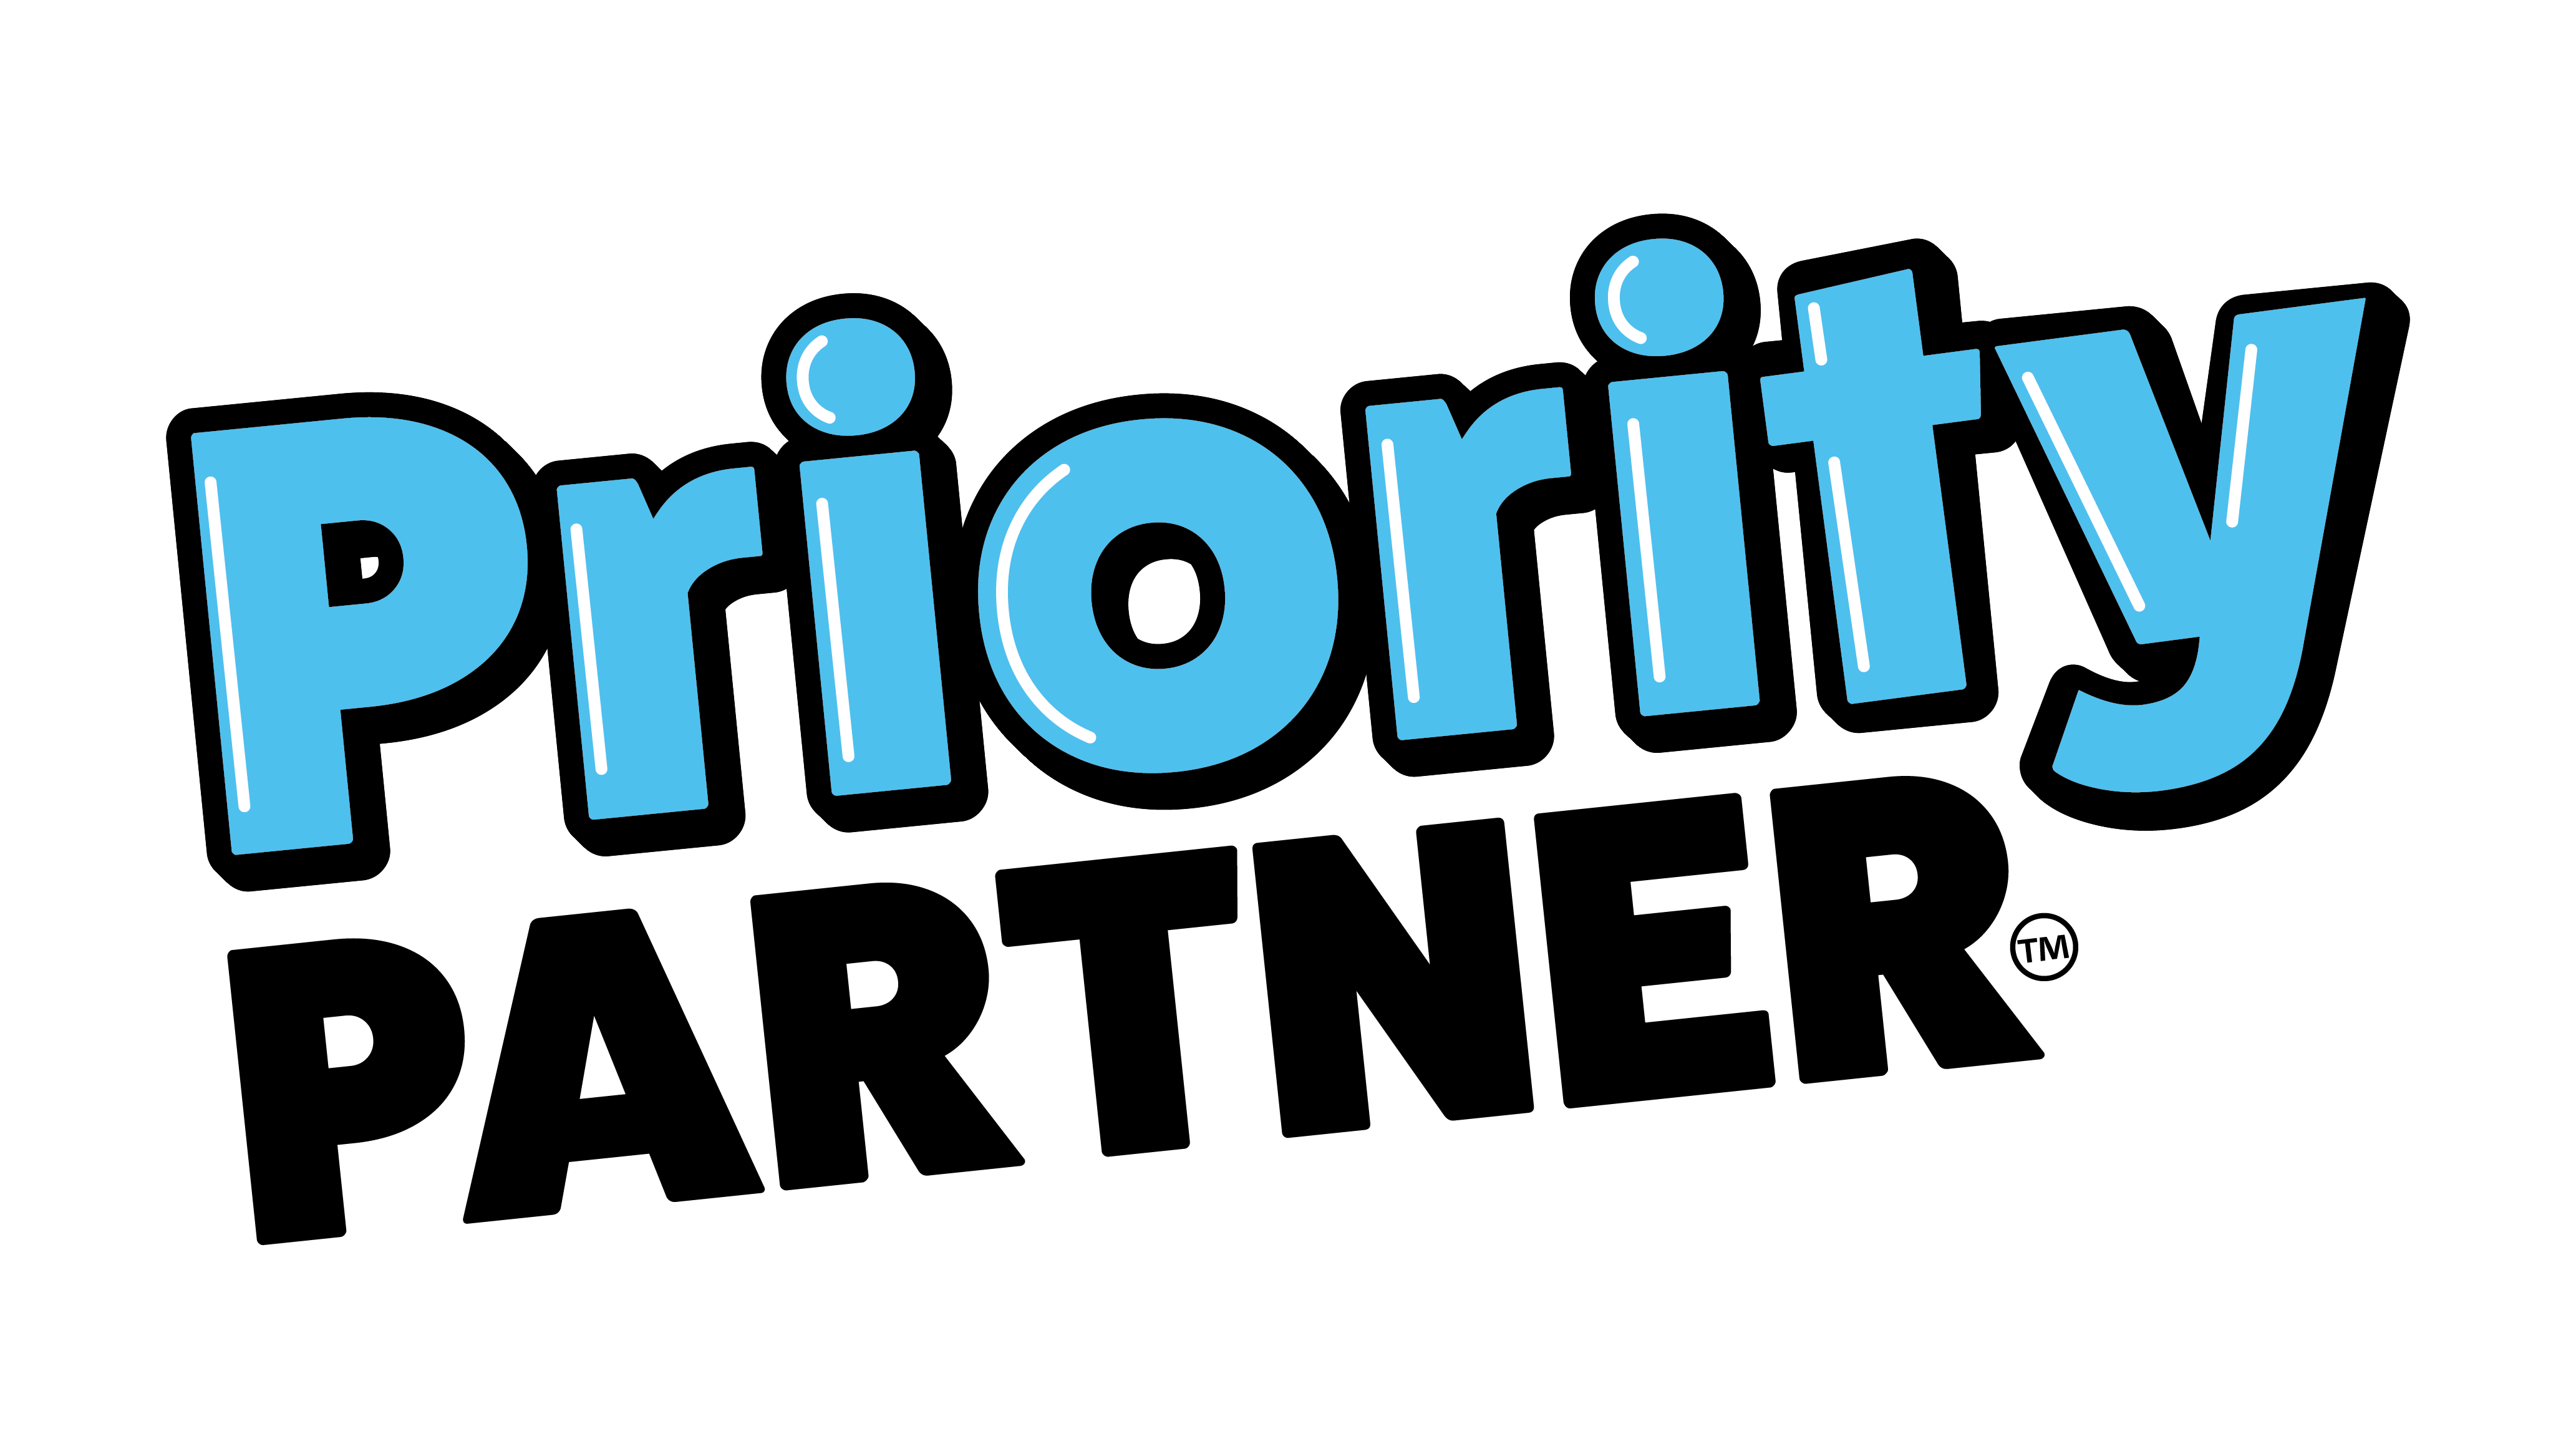 Image with 'Priority Partner'